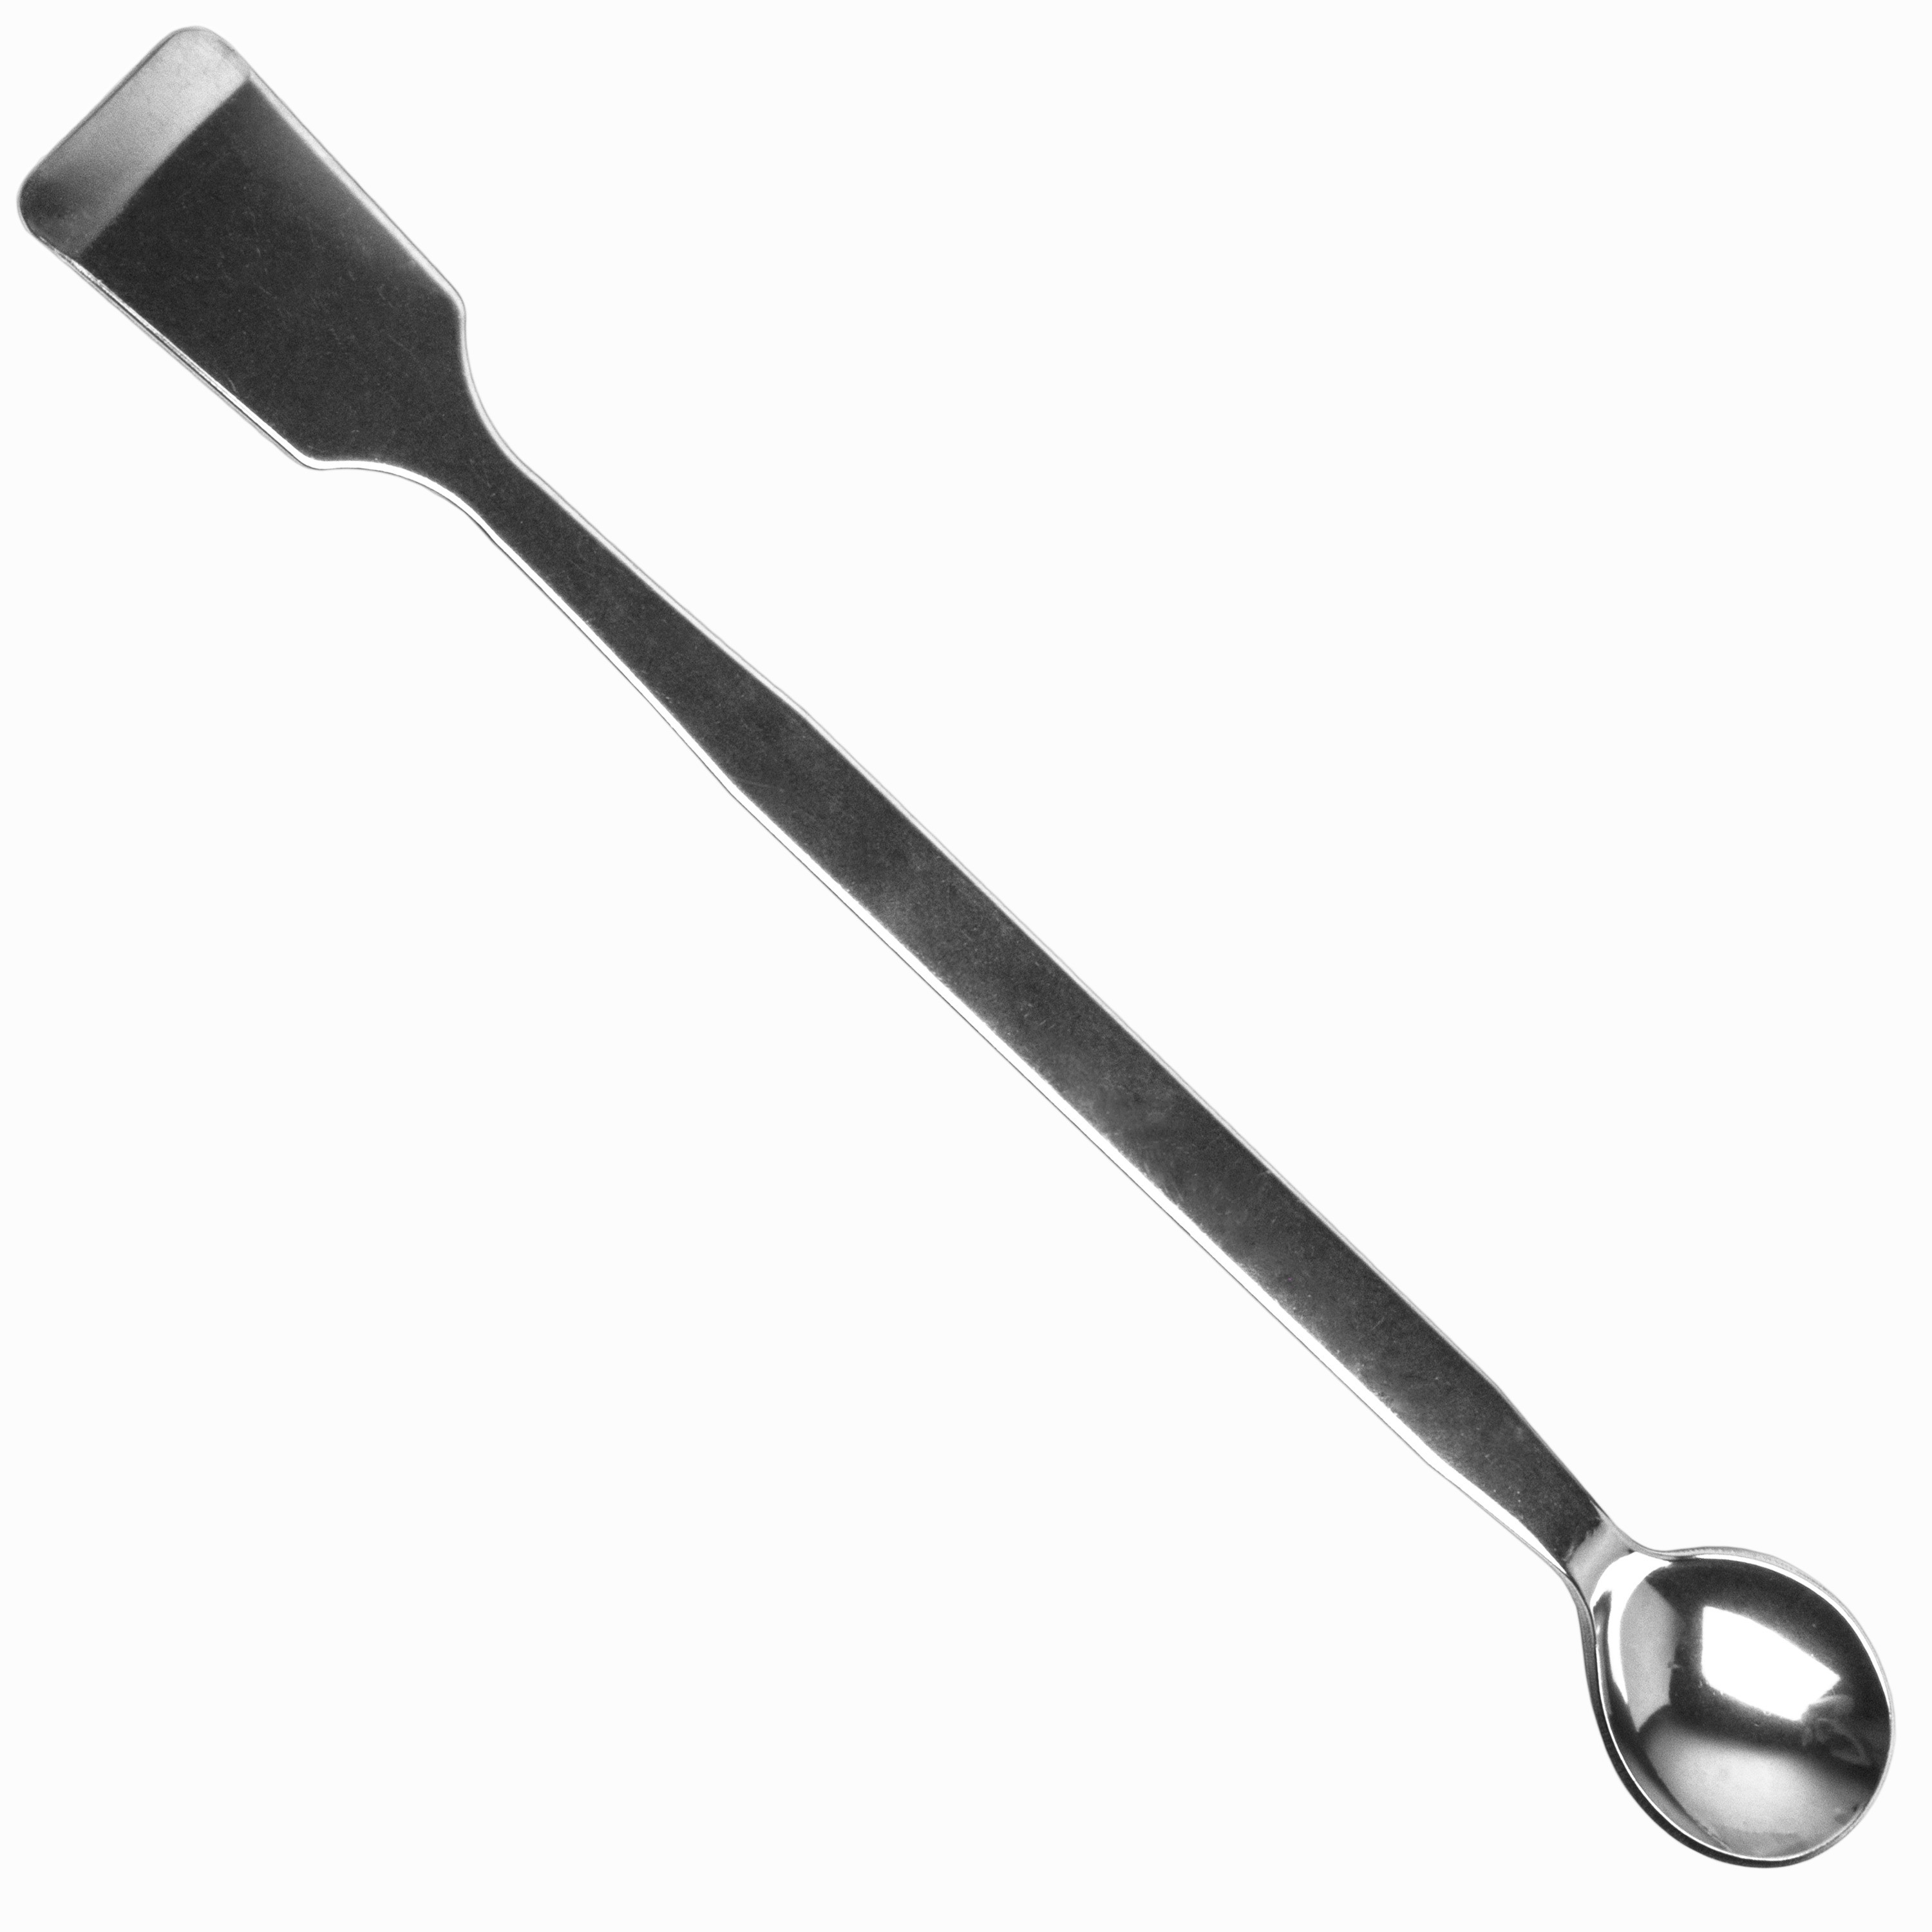 spatula used in chemistry lab